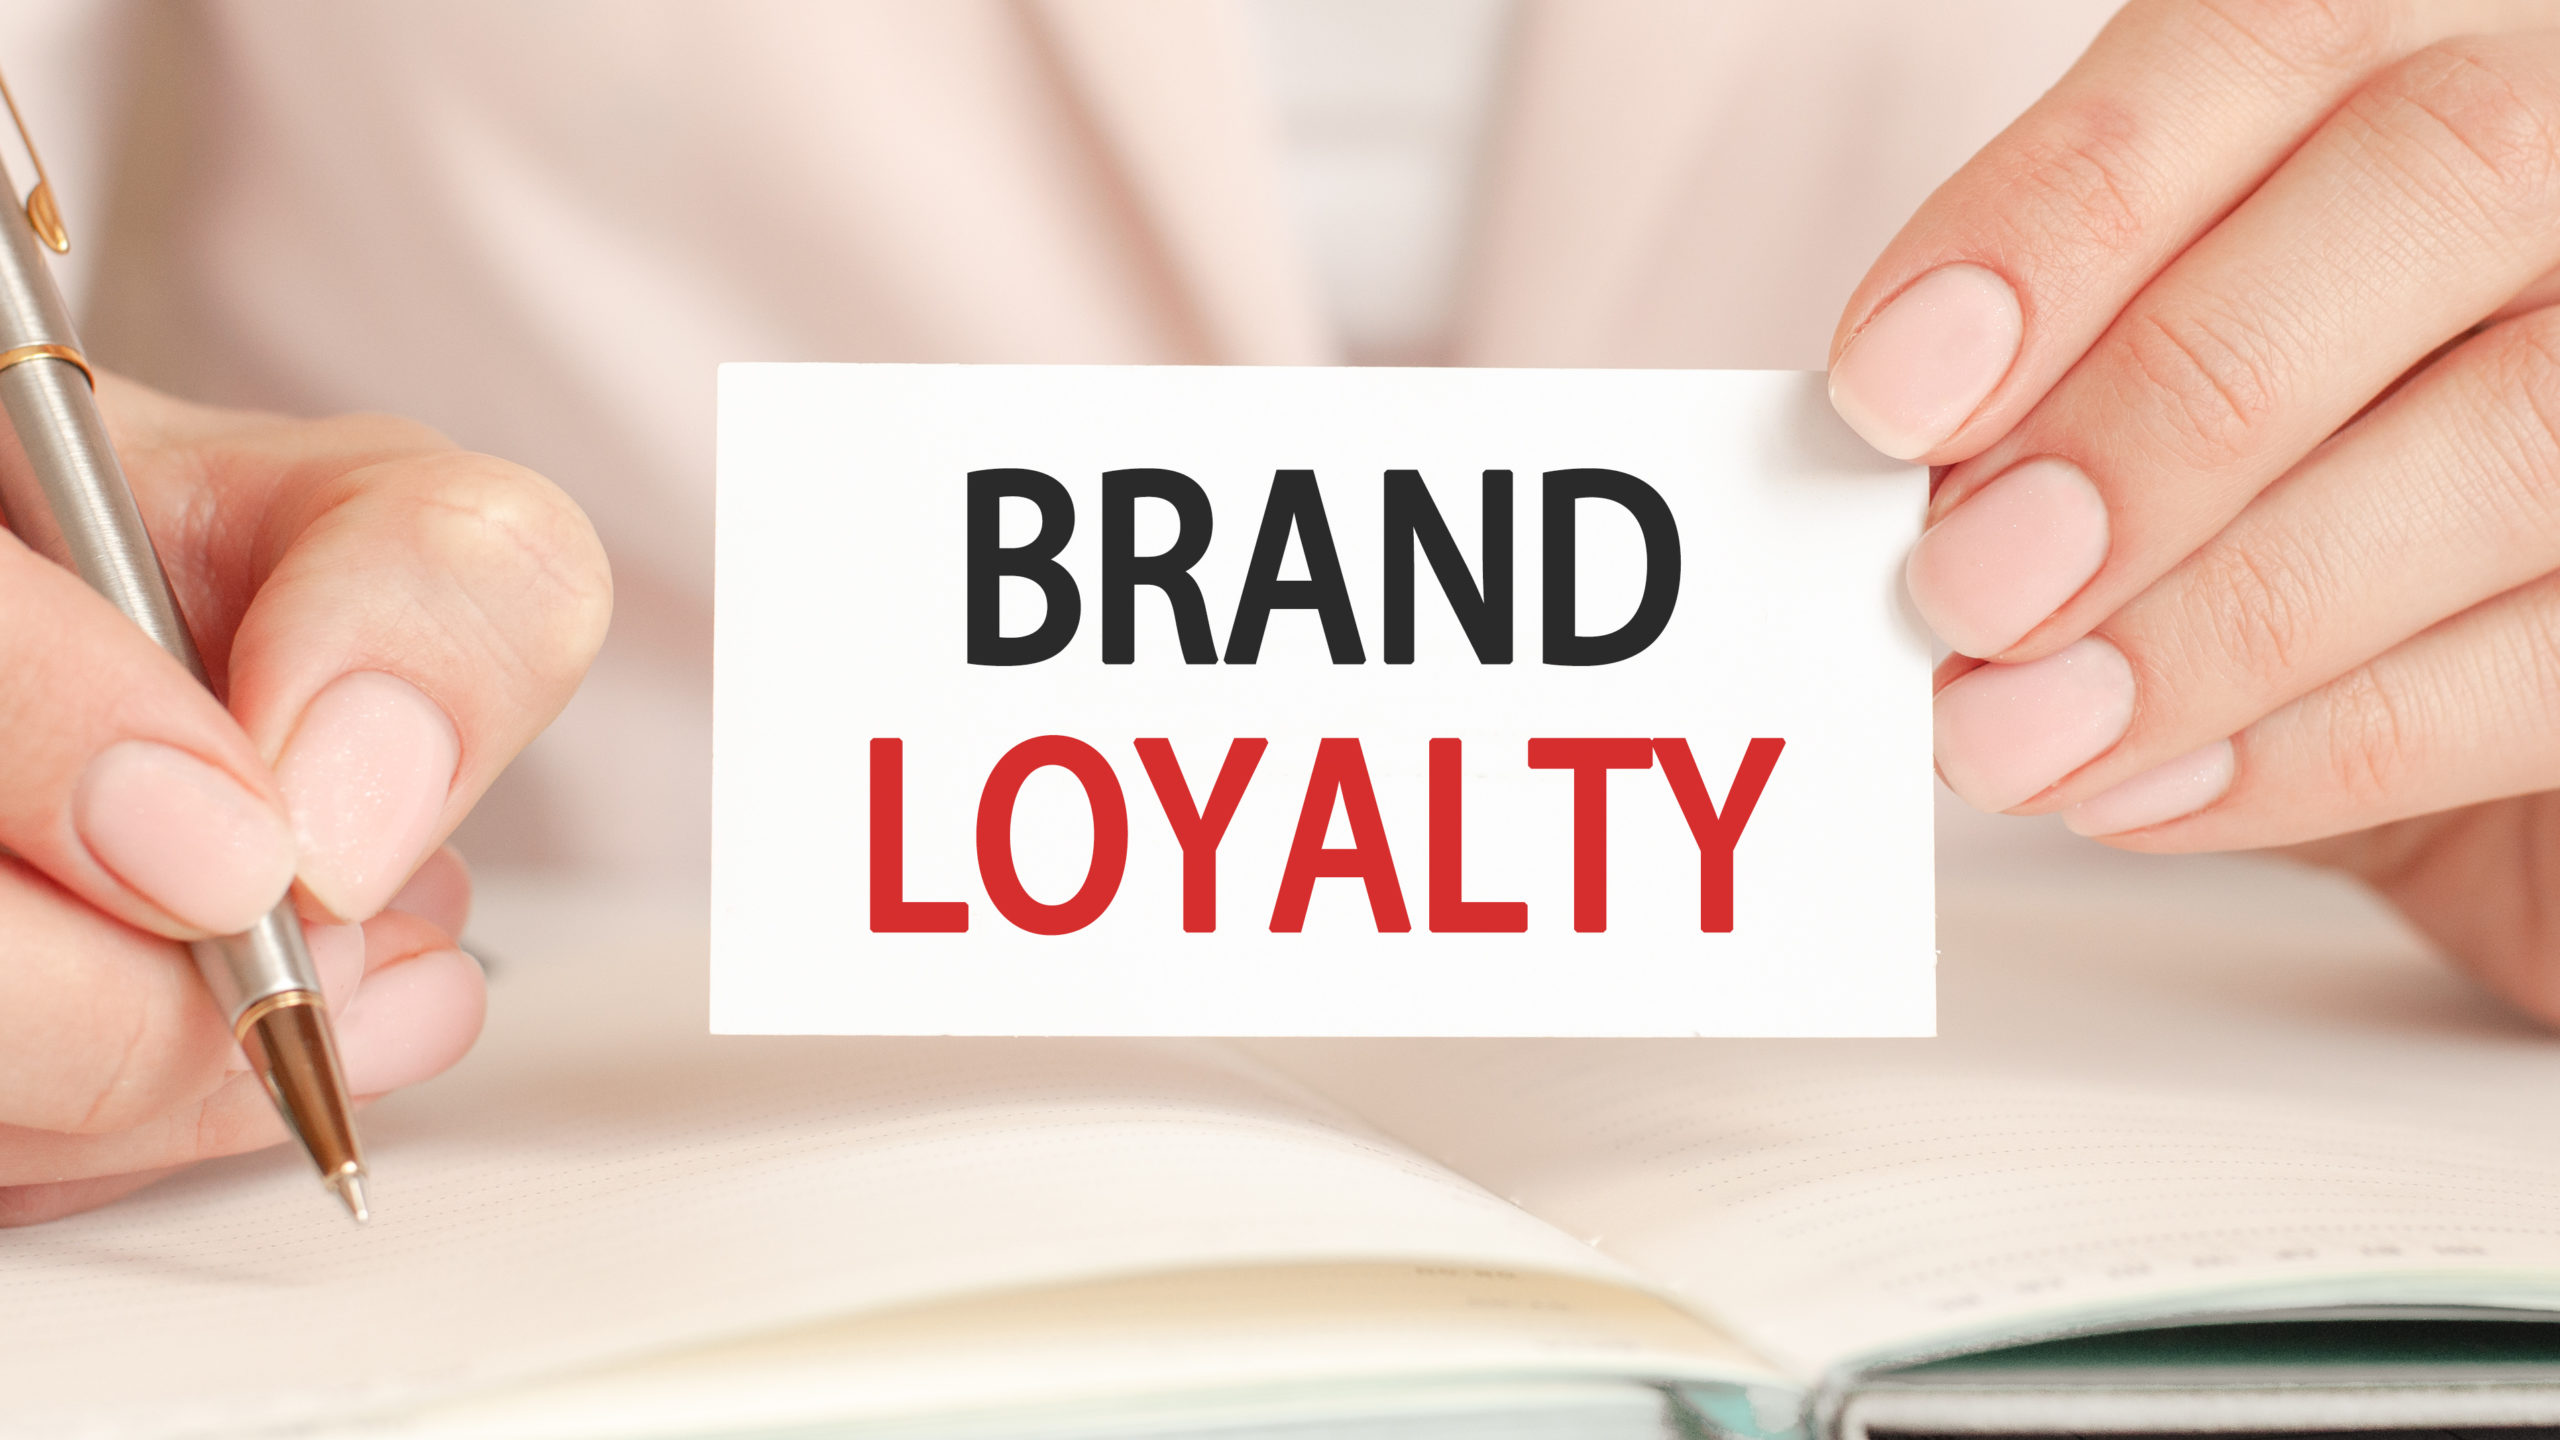 How To Make Customers Keep Coming Back To Your Brand